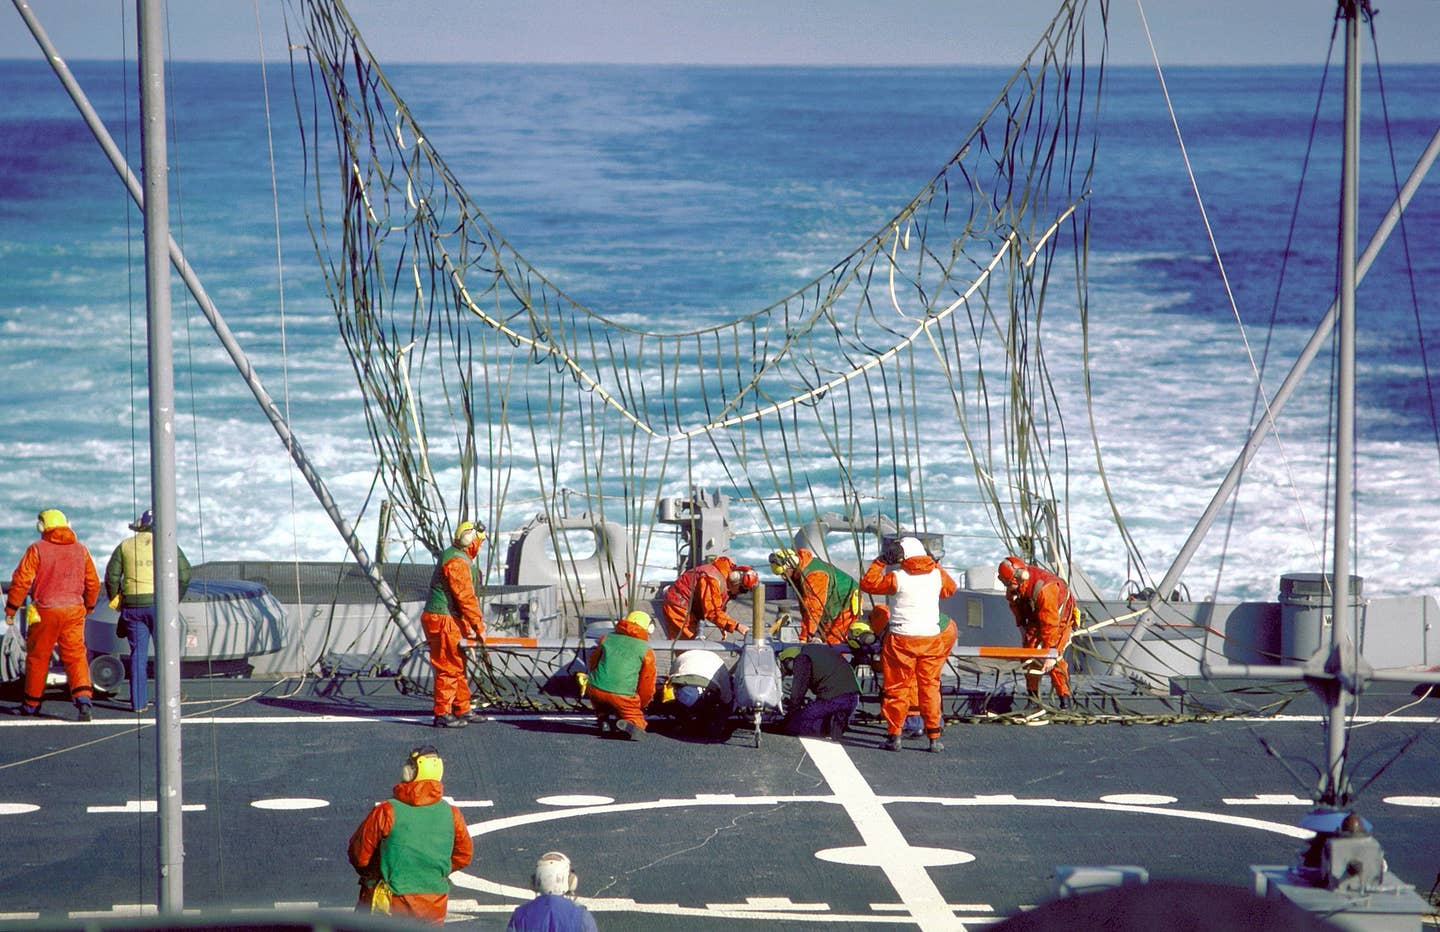 The Navy operating drones from ships other than aircraft carriers is not altogether new. Here, crewmen disengage a Pioneer I drone from a recovery net erected on the stern of the battleship USS&nbsp;<em>Iowa</em>&nbsp;(BB-61), back in 1986. <em>U.S. Navy</em>